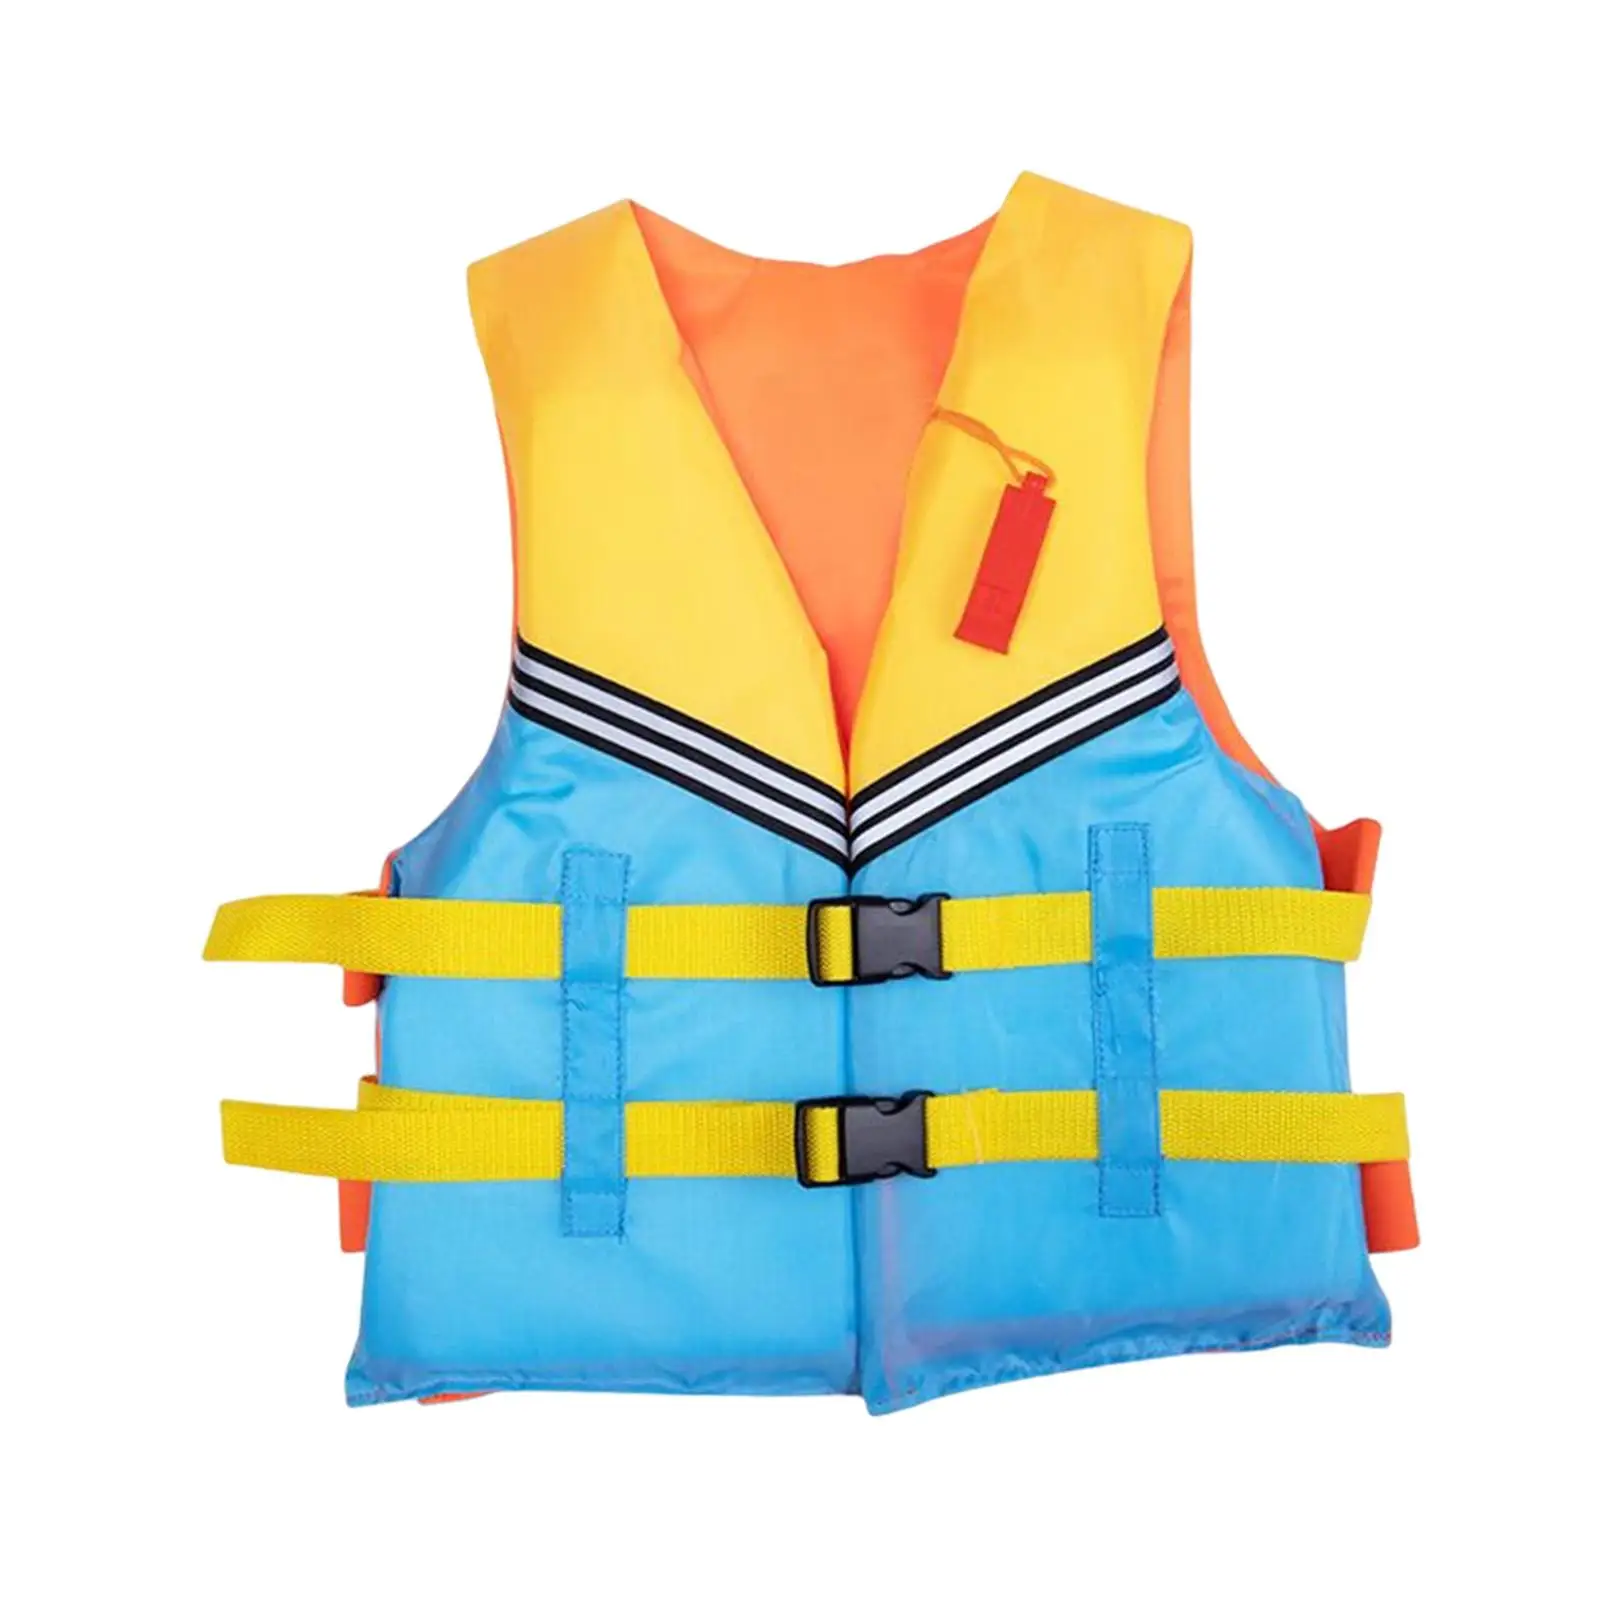 Outdoor Life Jacket Learn to Swim Adjustable with Whistle Children Swim Vest for Swimming Kayaking Surfing Wakeboarding Skiing